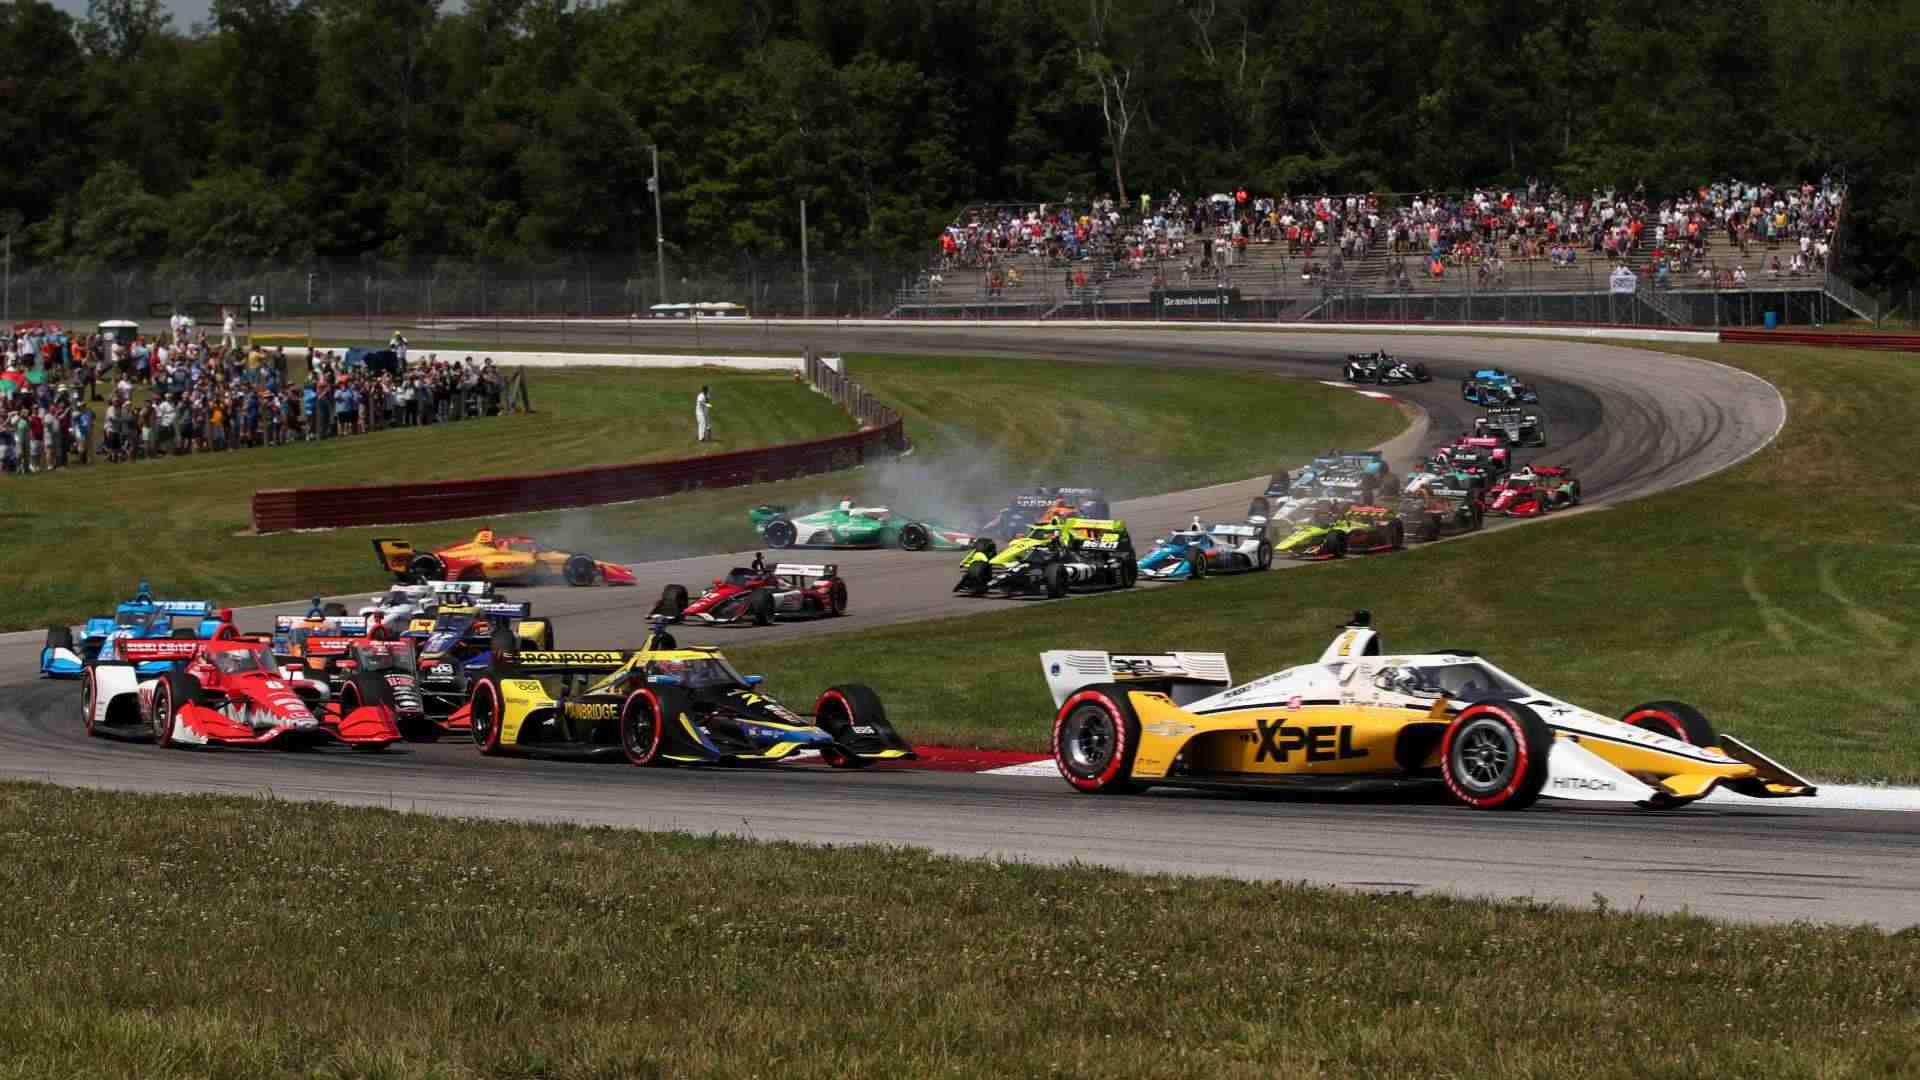 2022 IndyCar Series, MidOhio Schedule, Timings and Live Streaming